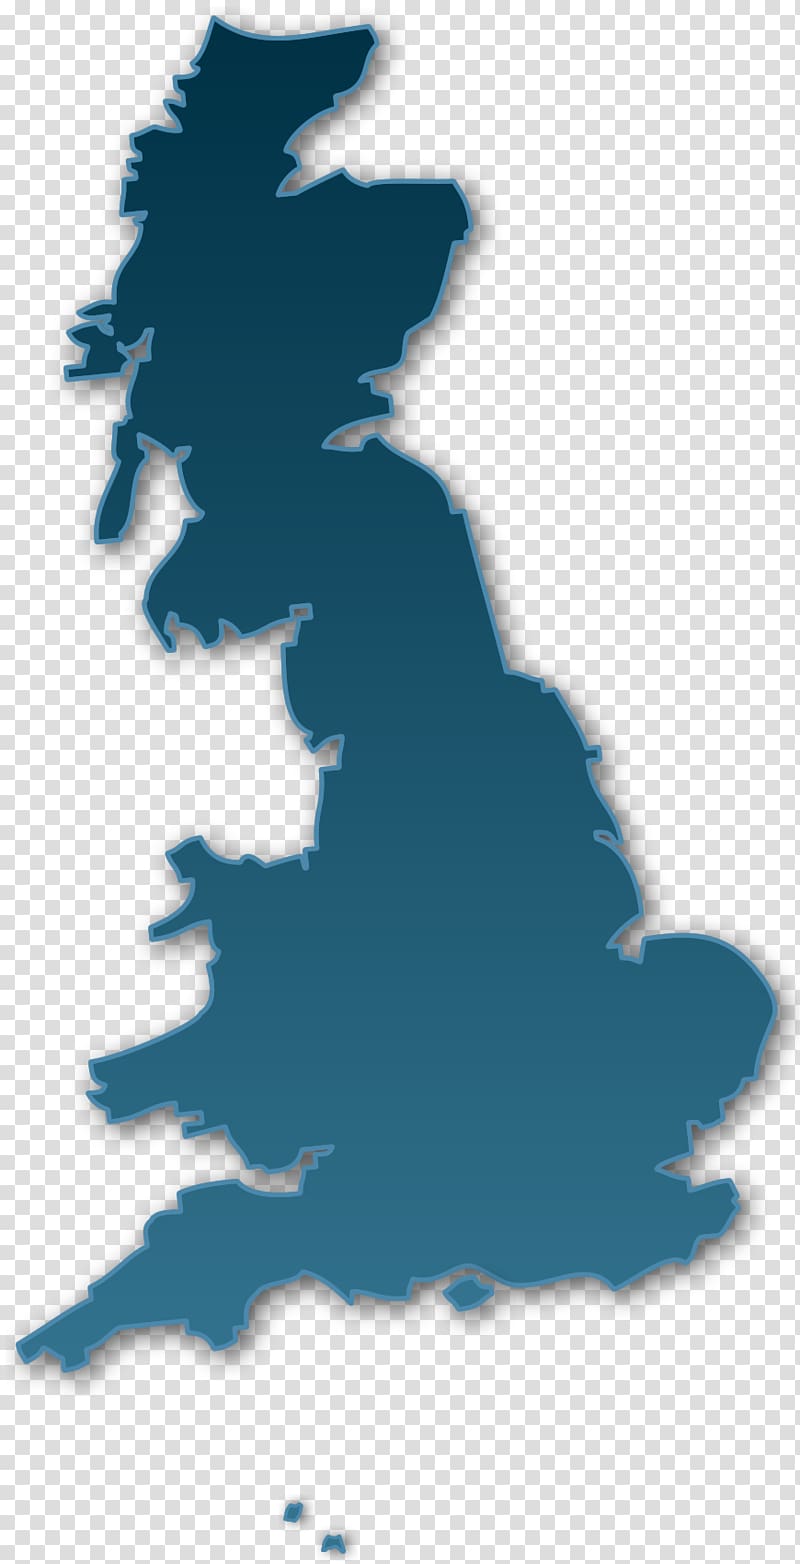 England The Barn Hotel British Isles Map Geography, Uk transparent background PNG clipart